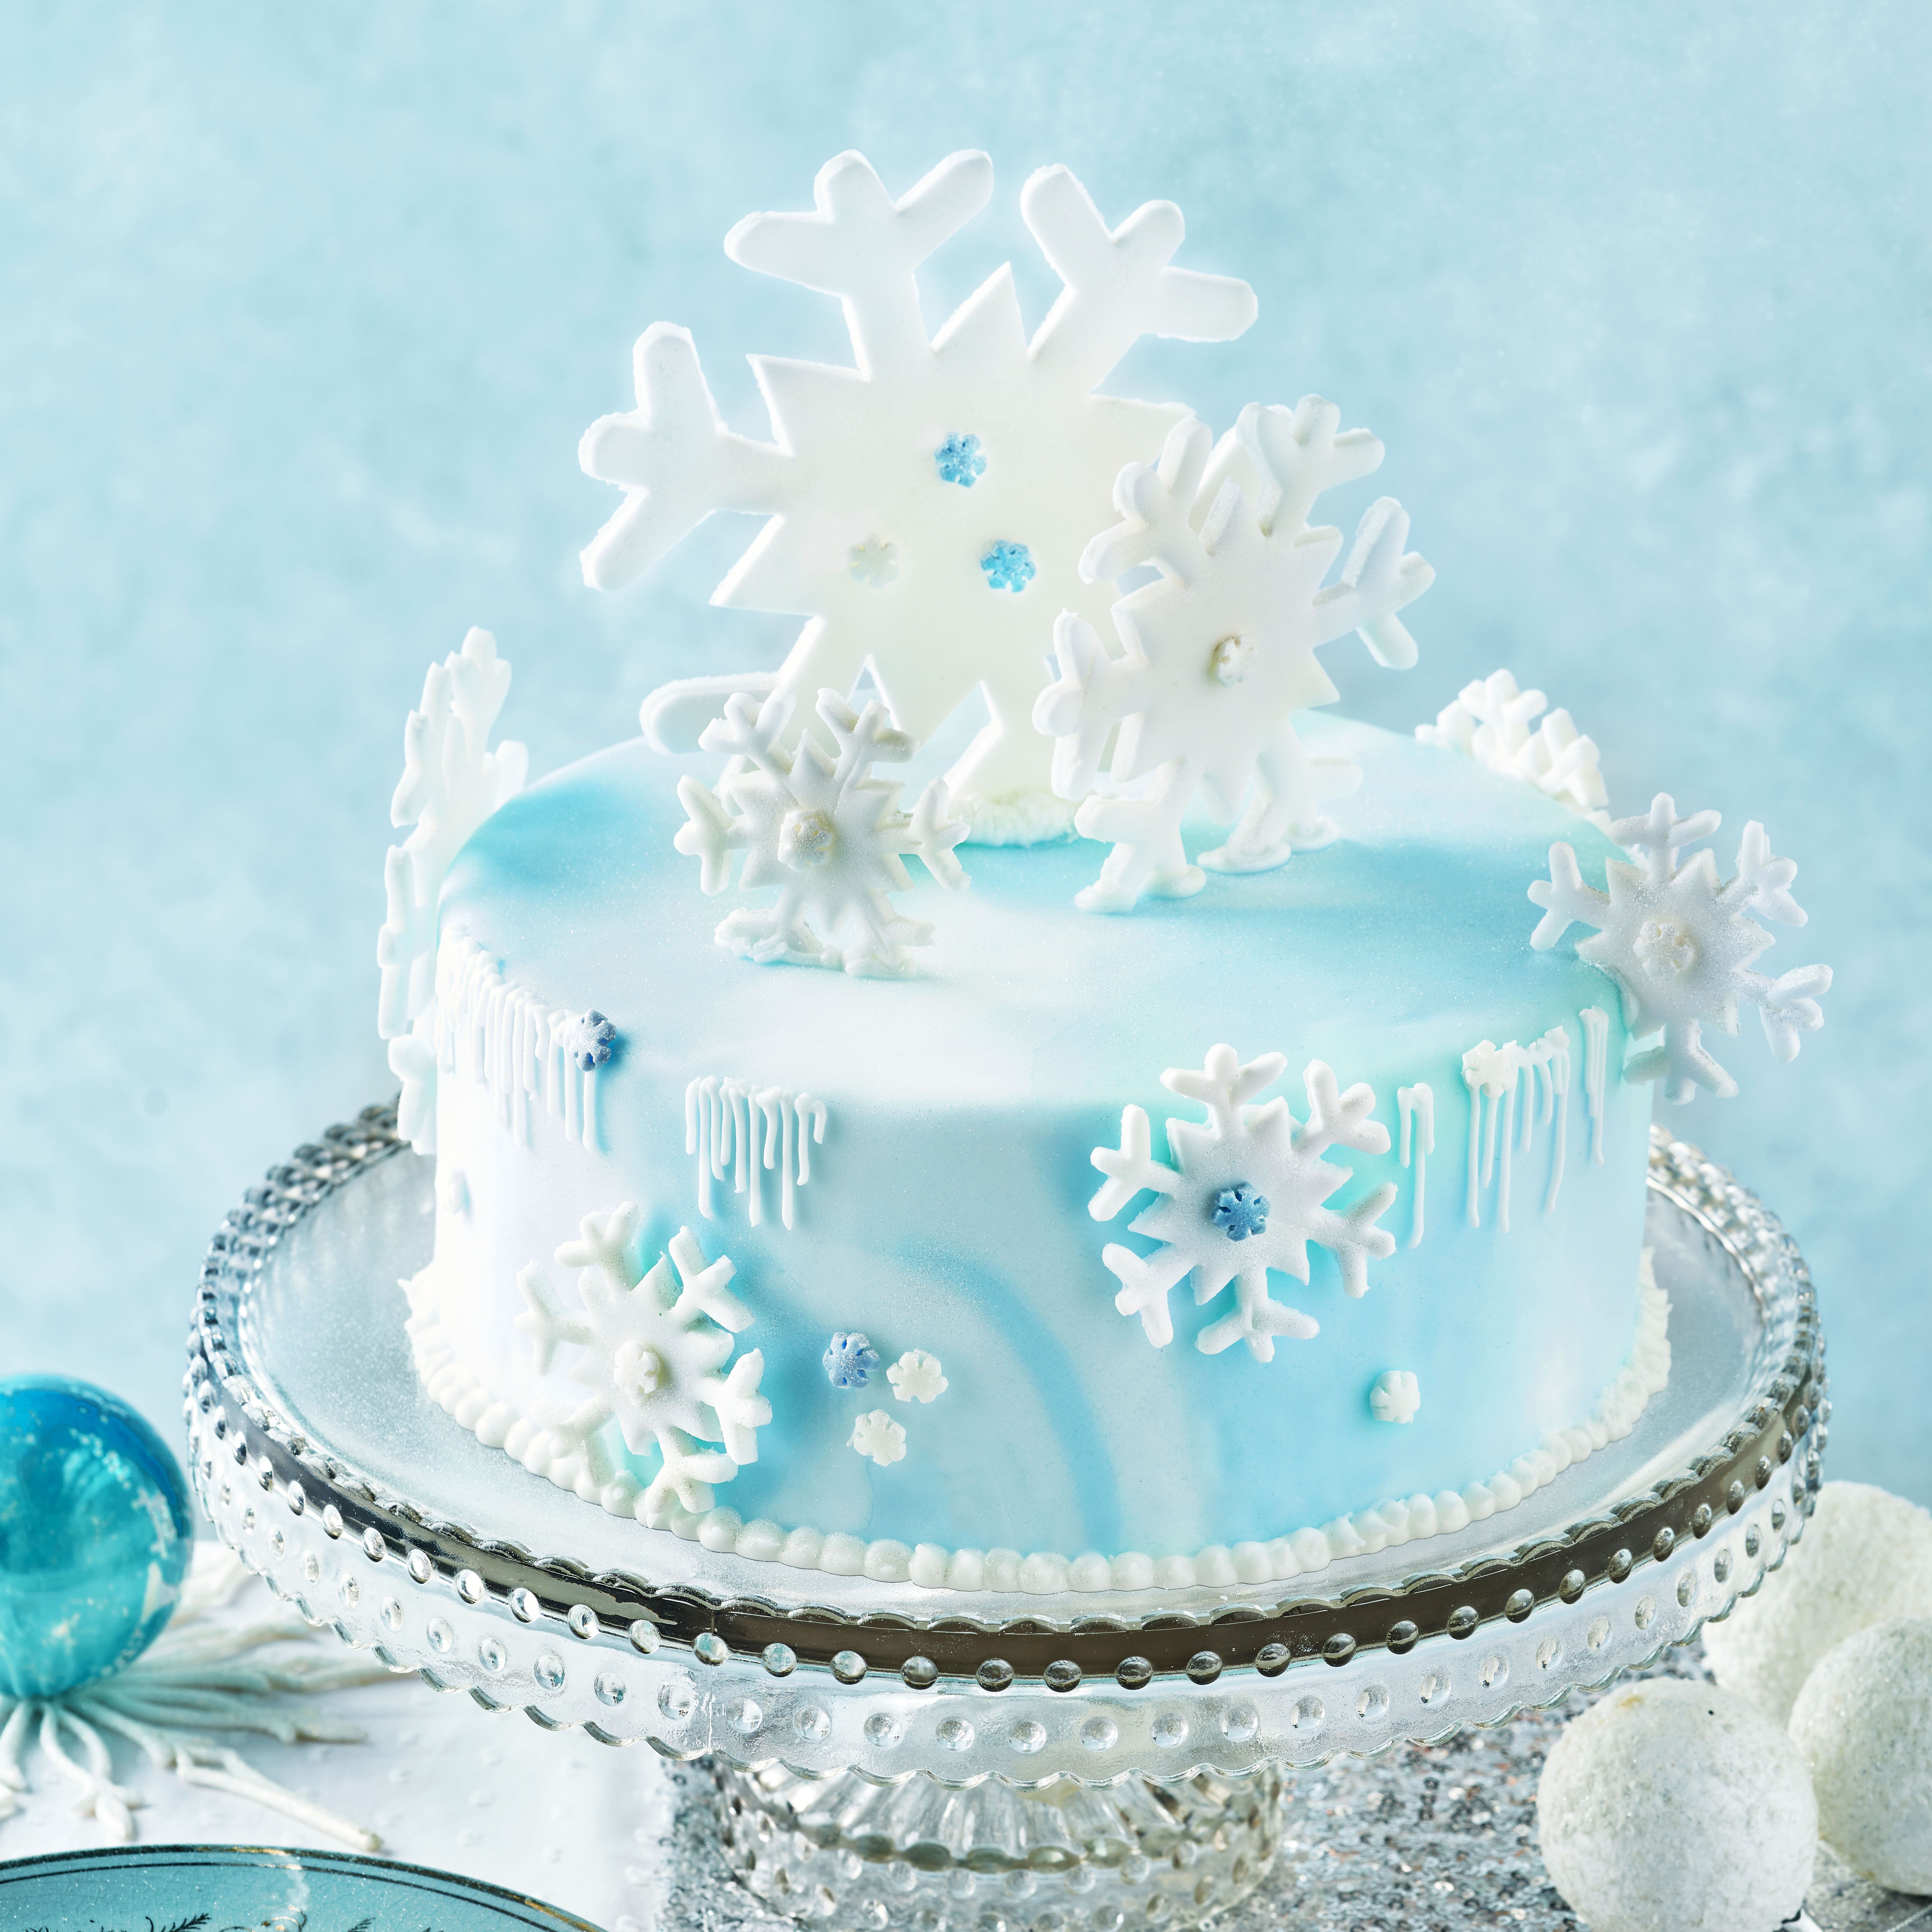 Butter Icing Cake – Pastry Empire | Delicious cakes and Pastries